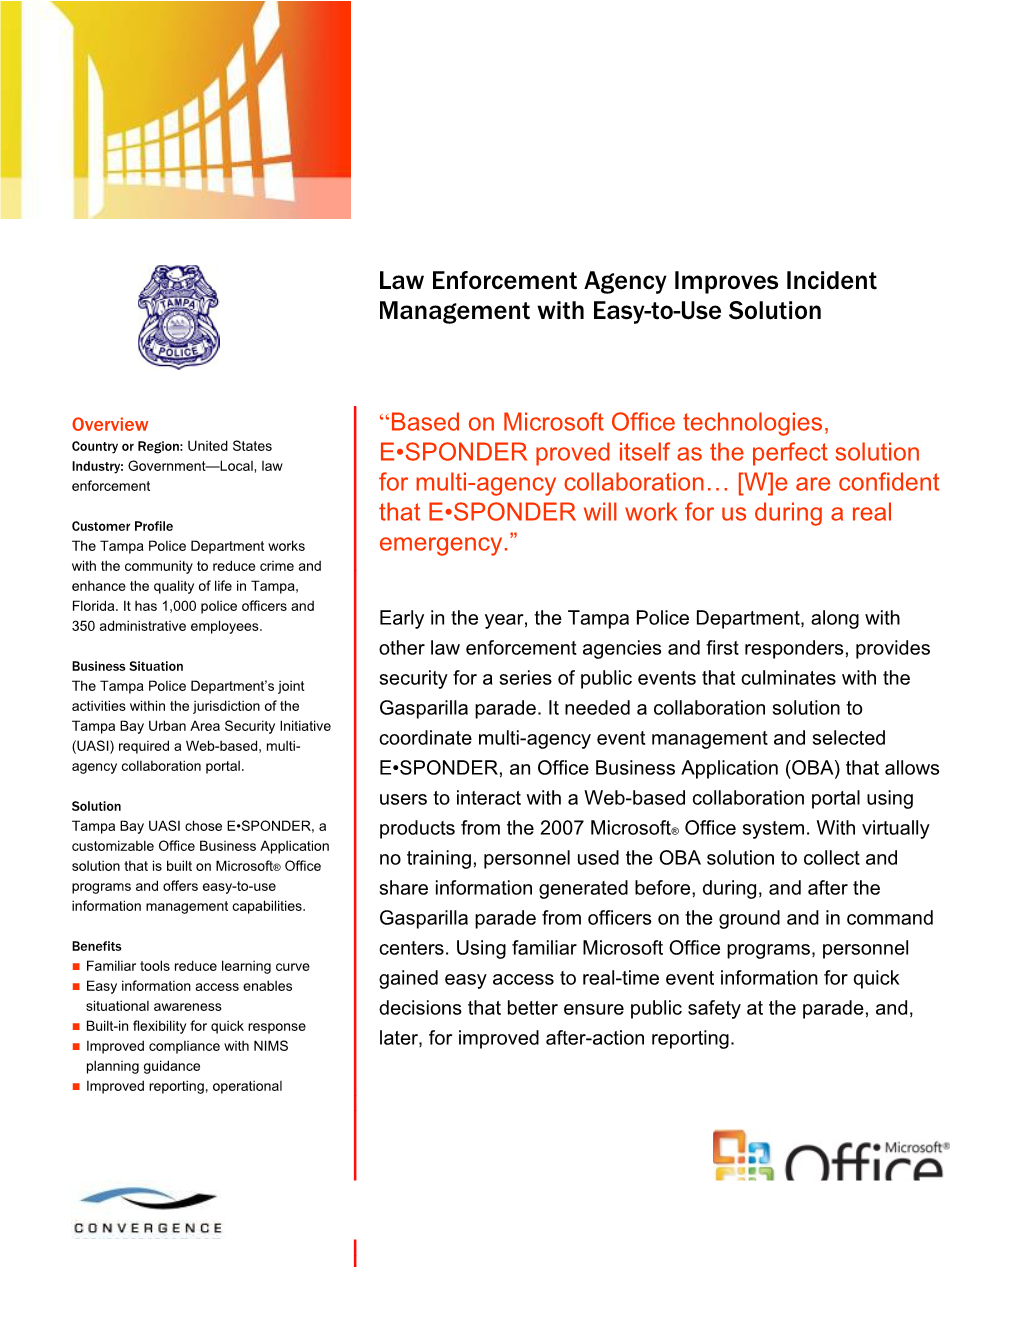 Law Enforcement Agency Improves Incident Management with Easy-To-Use Solution